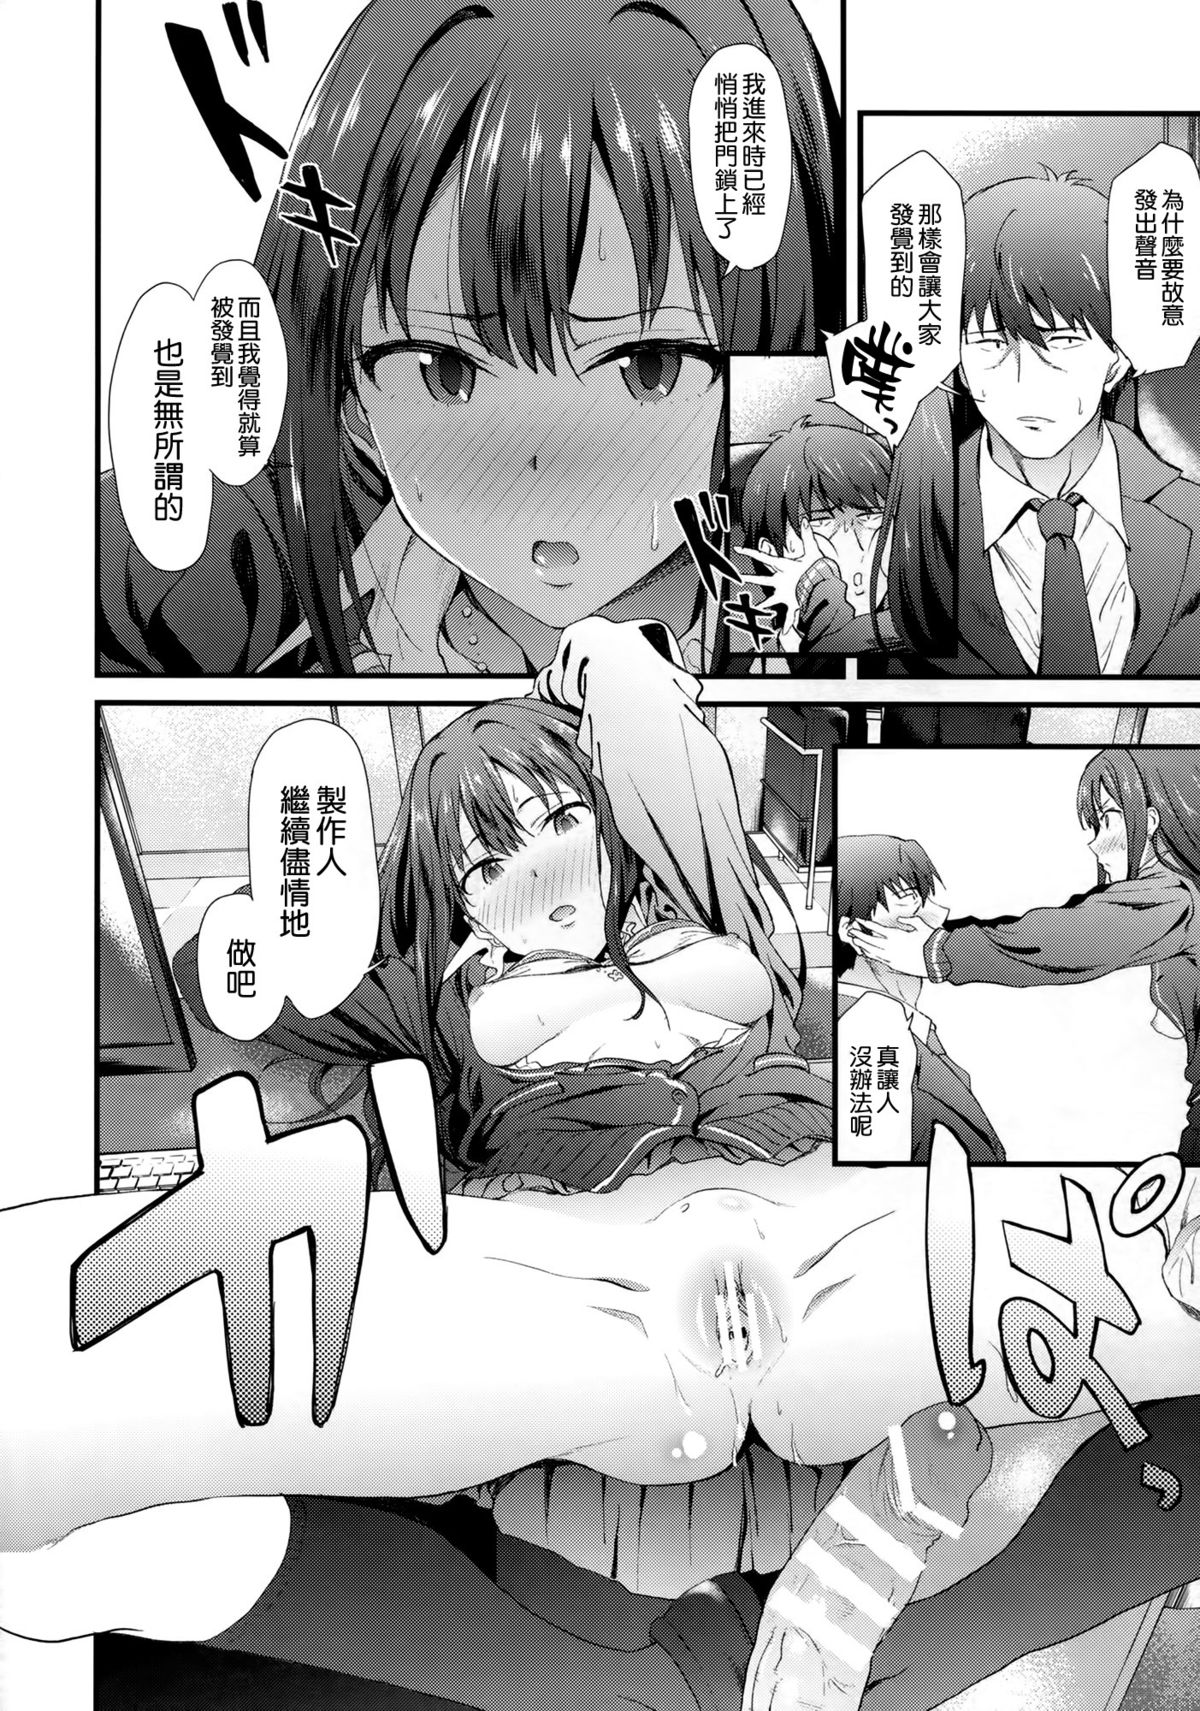 (C88) [EXTENDED PART (YOSHIKI)] SBRN (THE IDOLM@STER CINDERELLA GIRLS) [Chinese] [空気系☆漢化] page 18 full